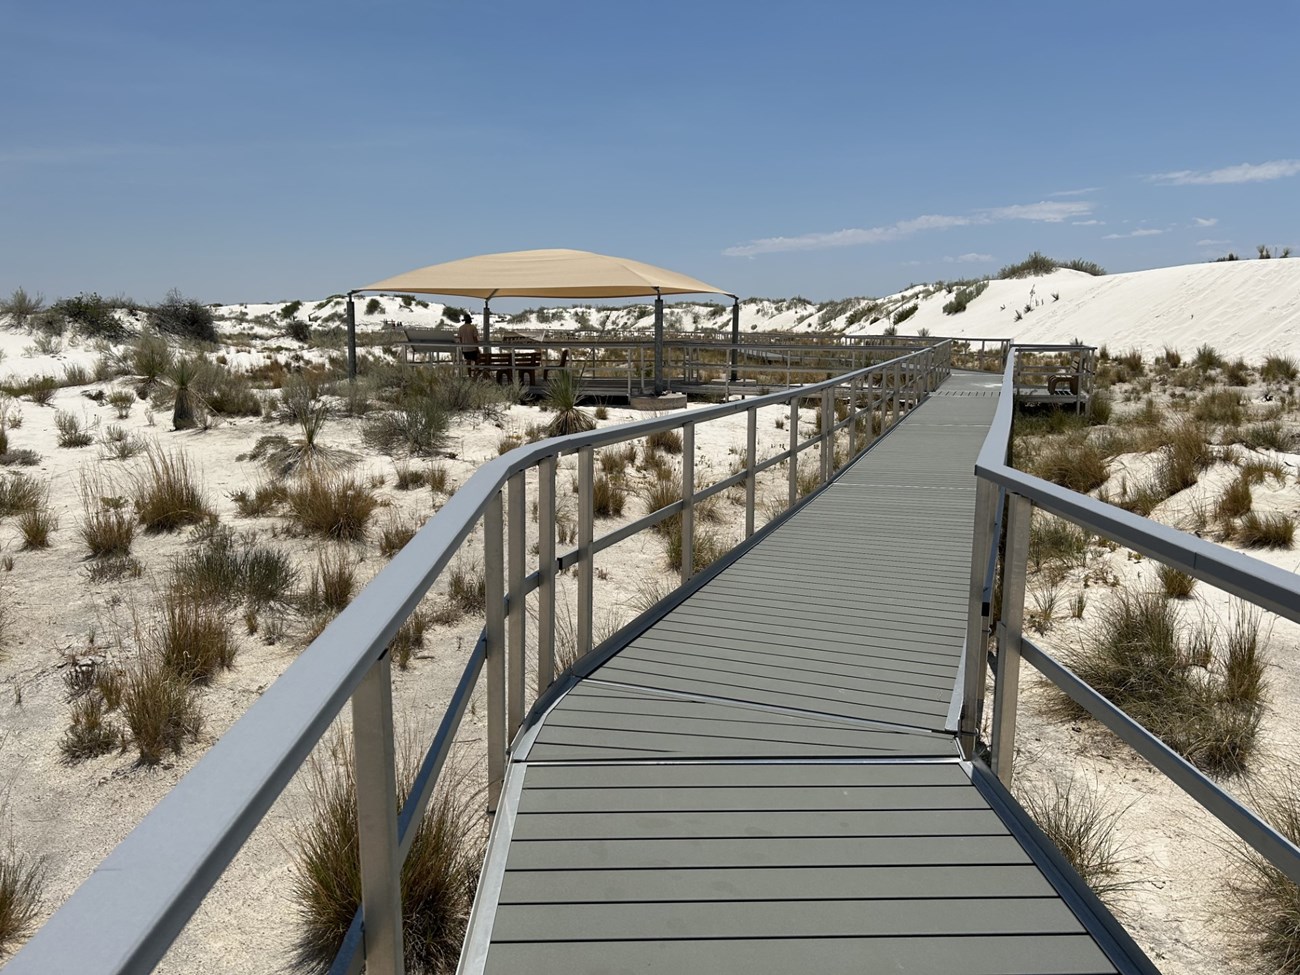 a boardwalk with railings extends into the distance among white sands and sporadic plant life. A covered pavilion is seen in the distance.